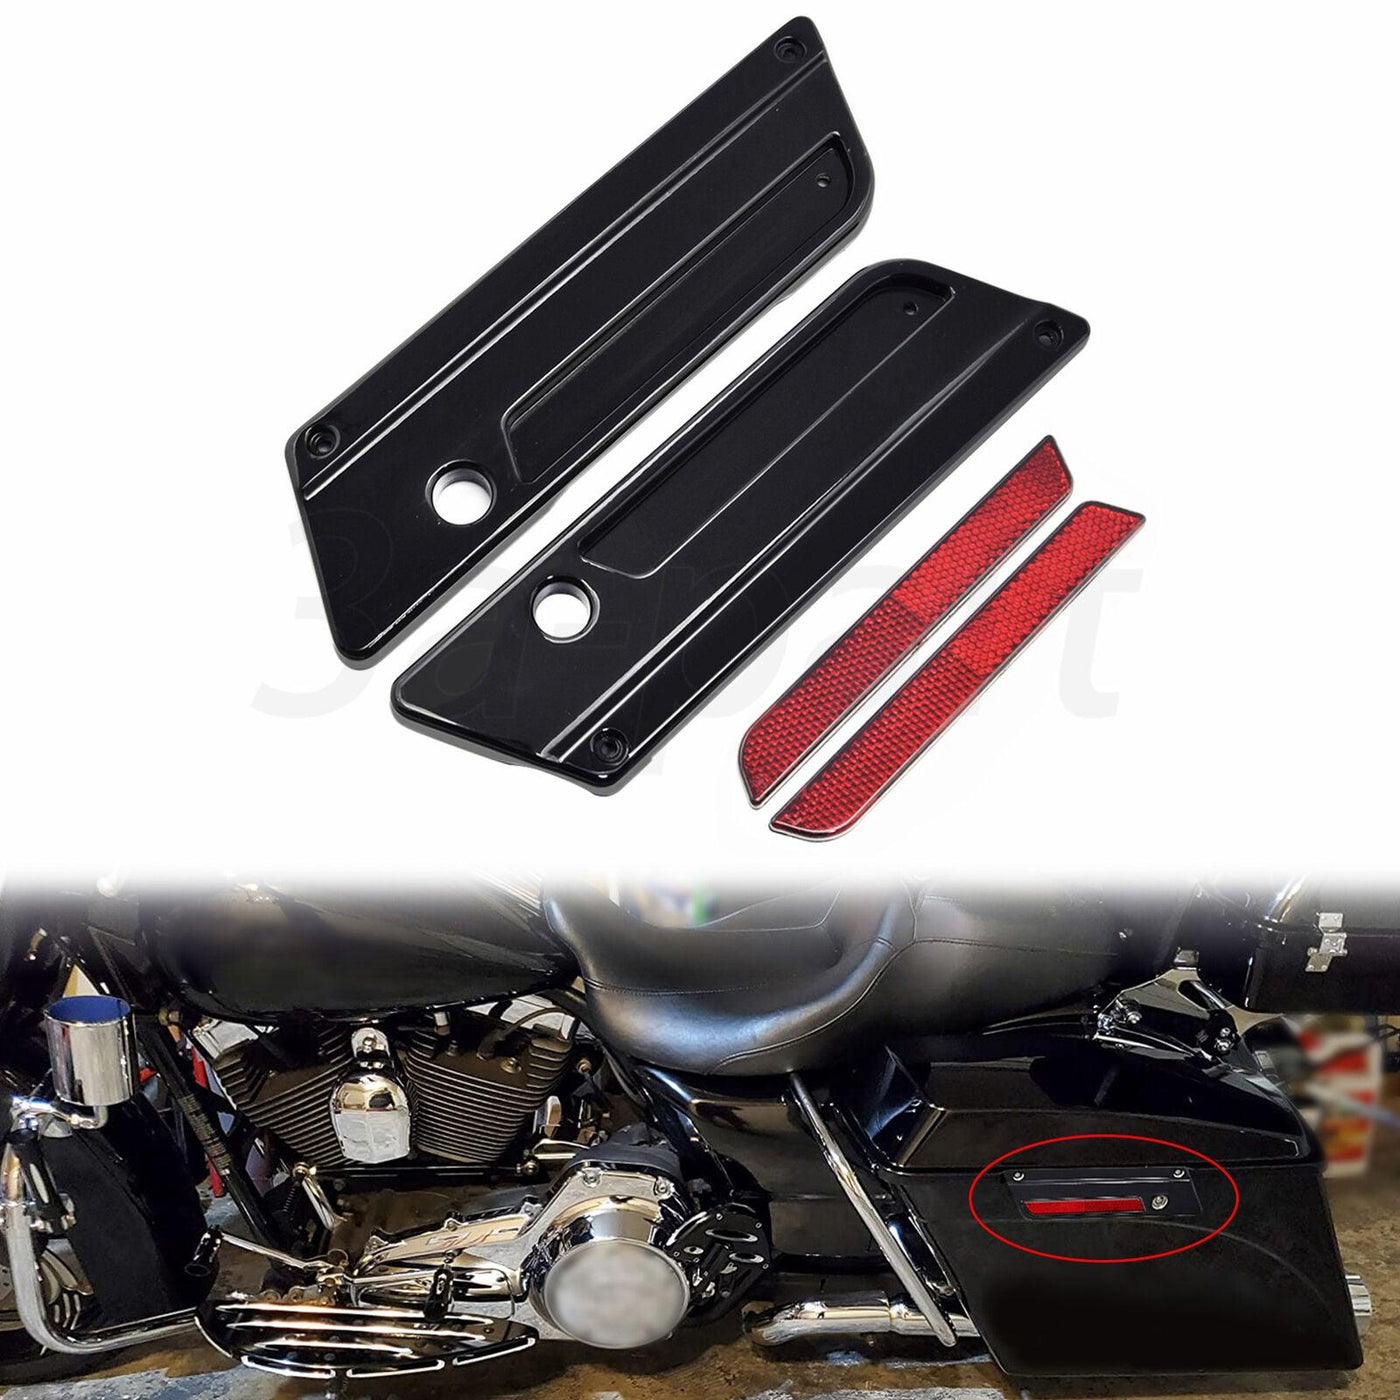 Black Saddlebag Latch Covers Reflectors Fit for Harley Electra Road Glide 93-13 - Moto Life Products